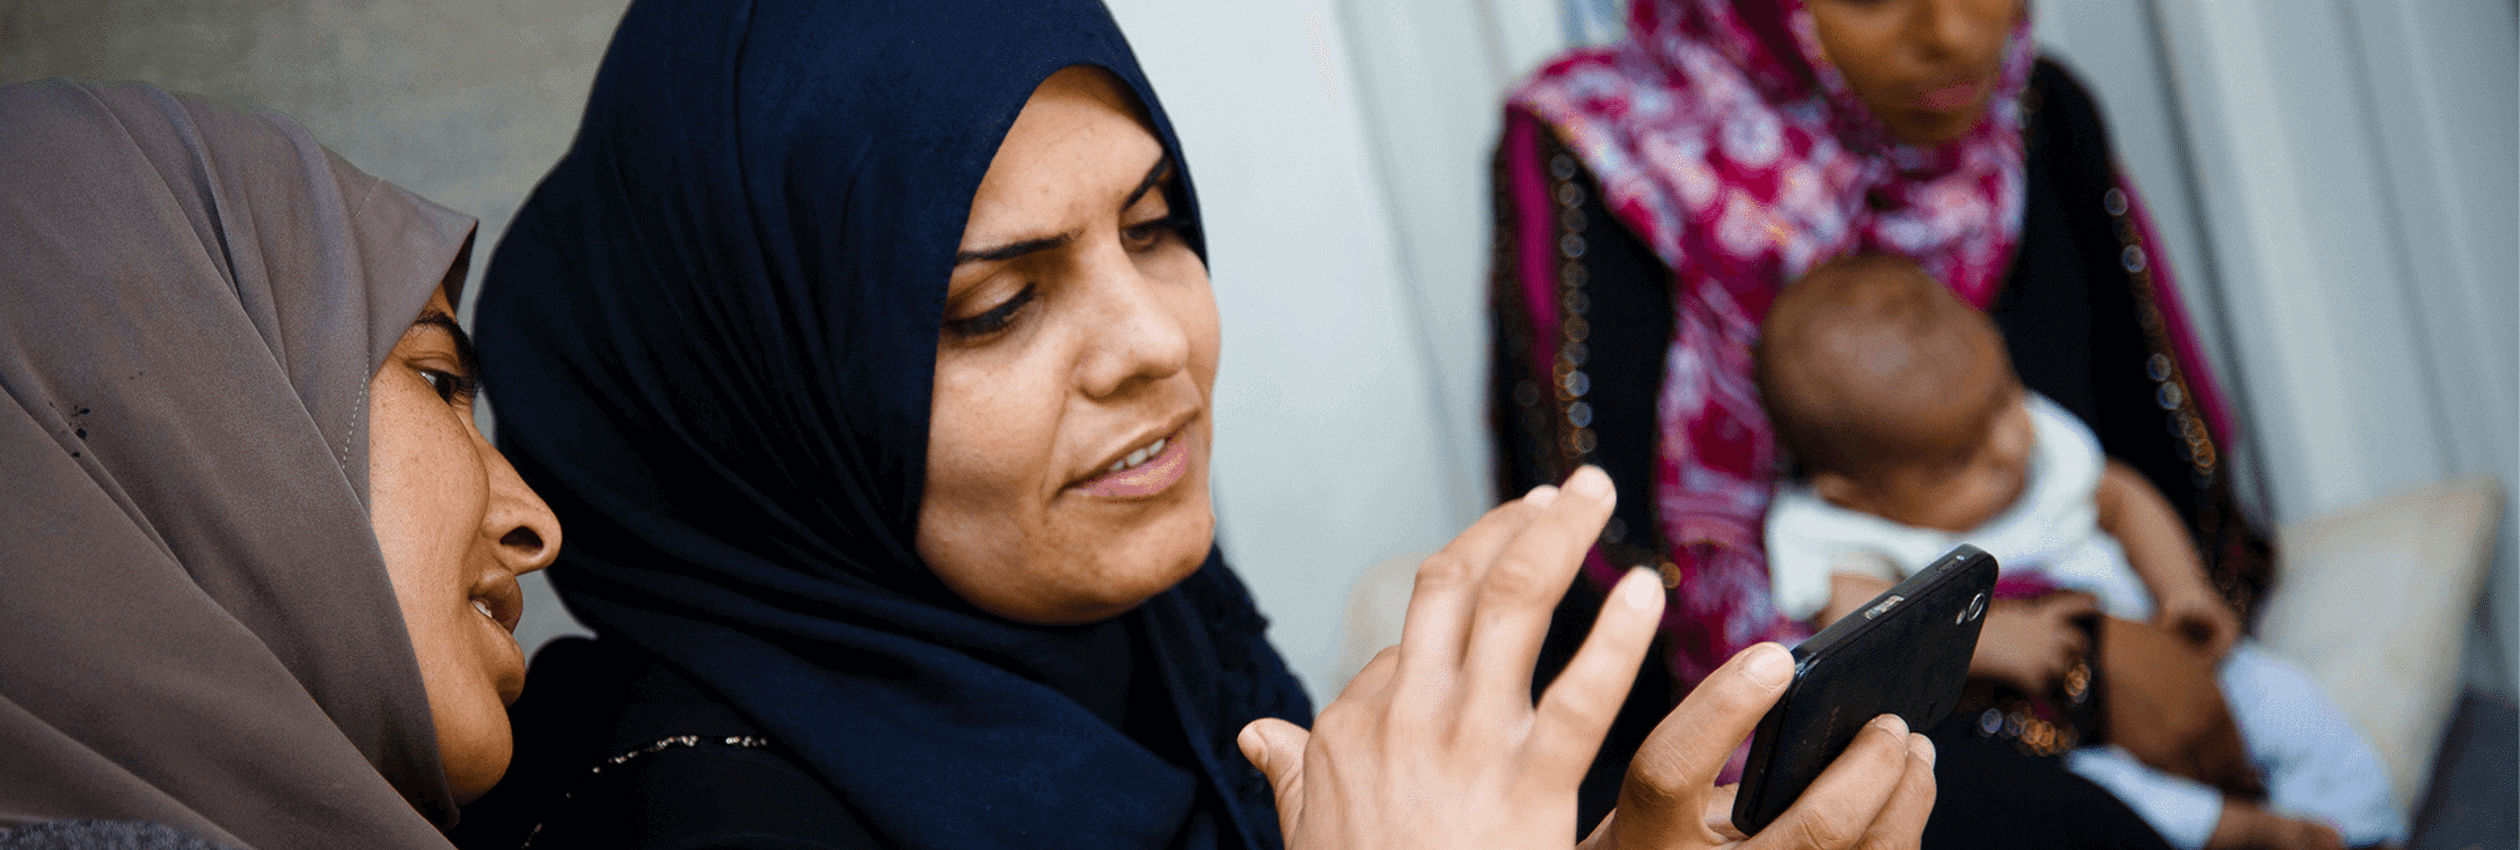 Connecting worlds app shows the unexpected benefits of this UNHCR iniative